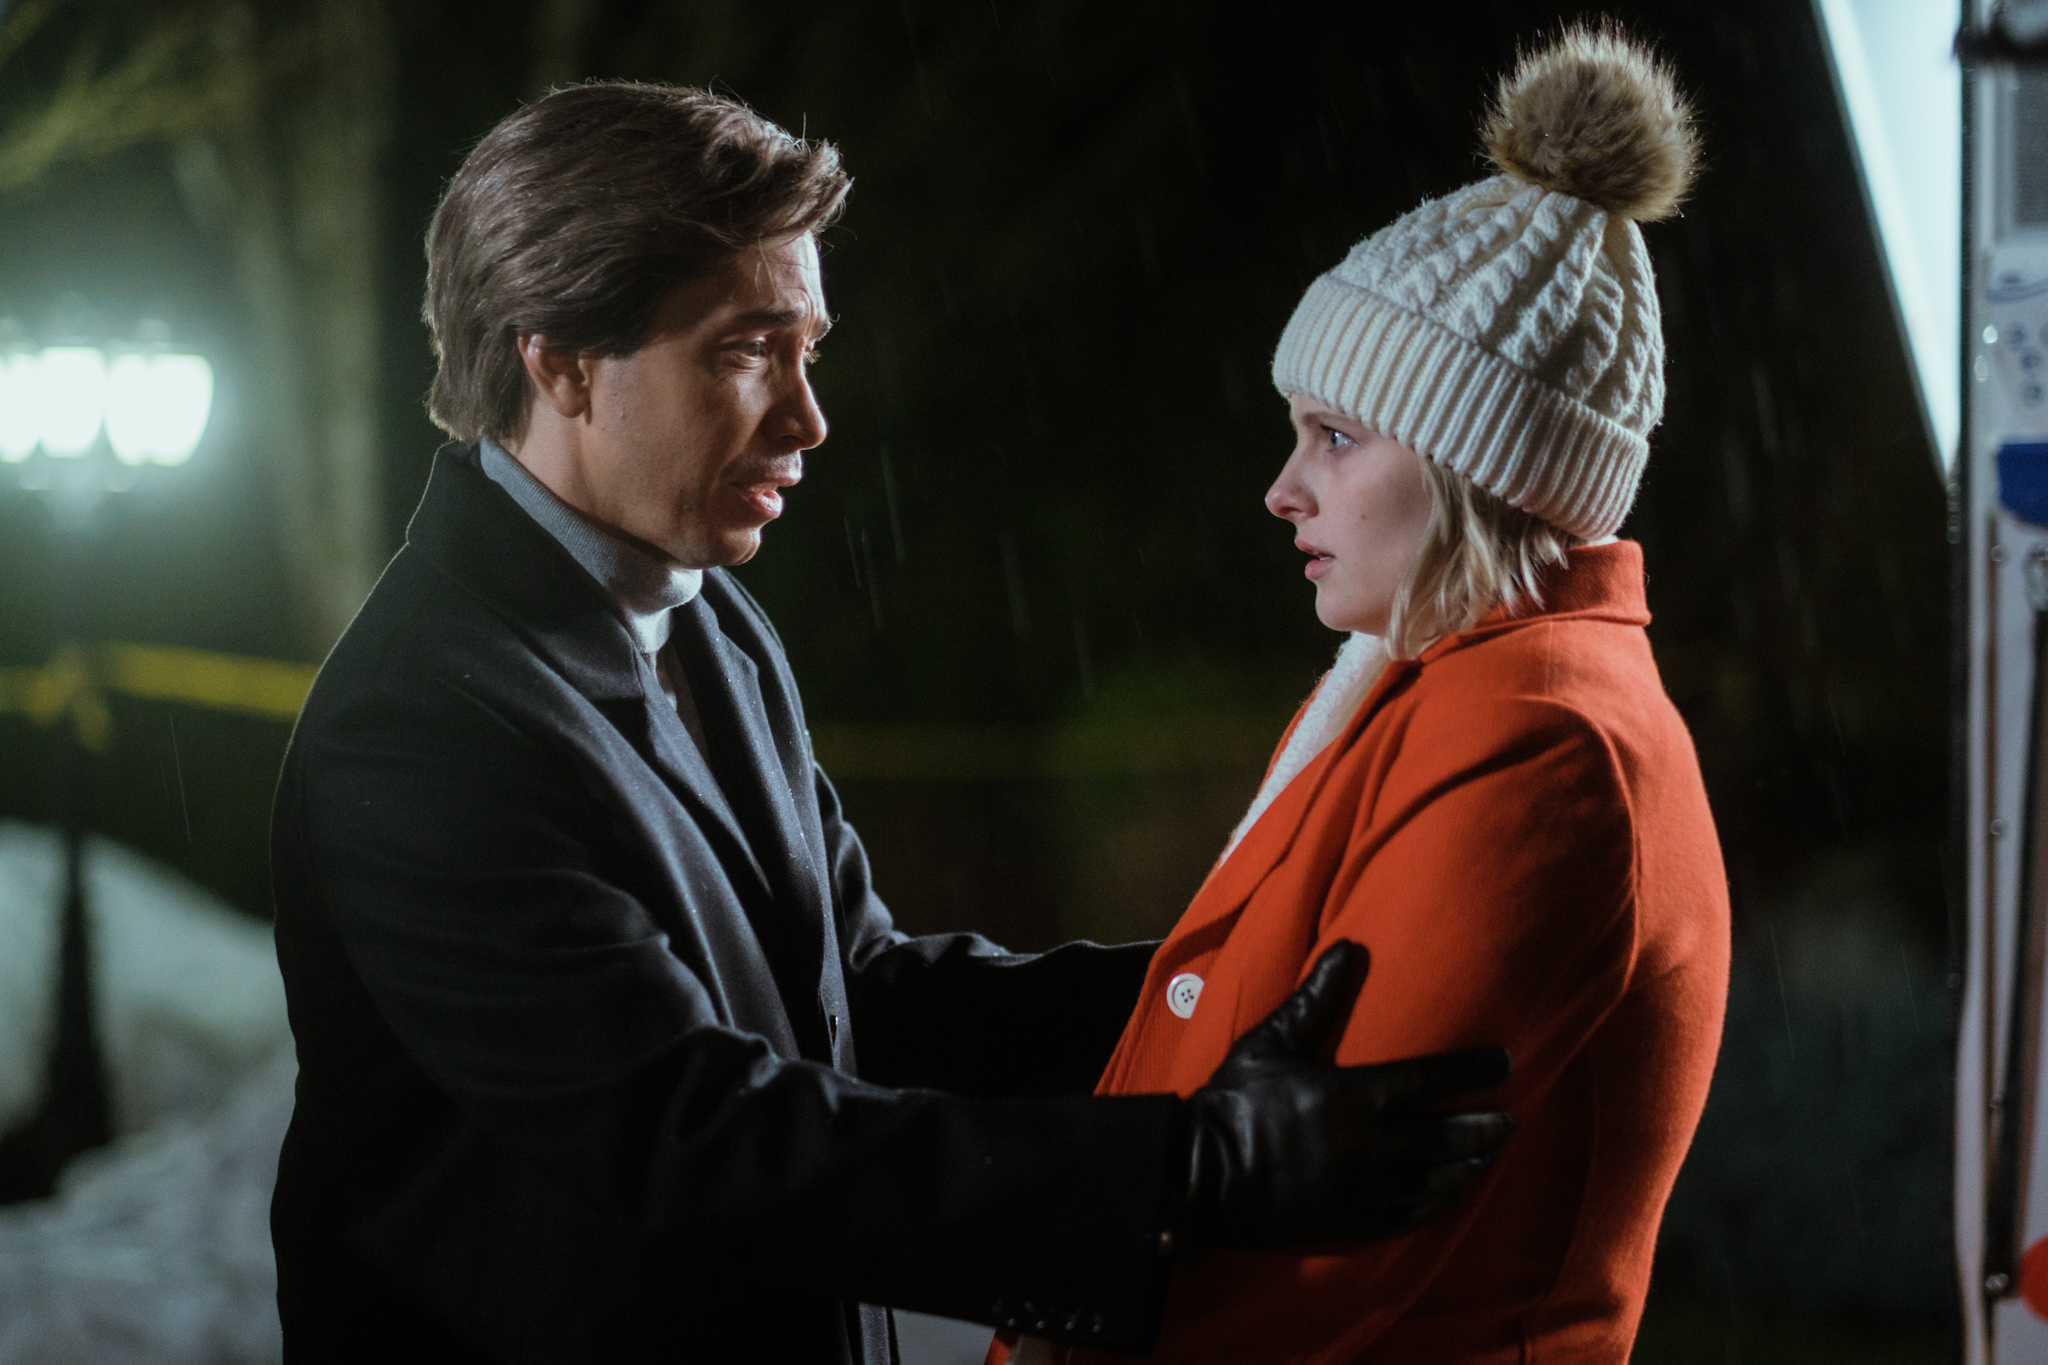 A still of Henry (Justin Long) and Winnie (Jane Widdop) in the film 'It's a Wonderful Knife'. Henry stands in front of Jane, holding her by the shoulders. Jane has an alarmed expression on her face.